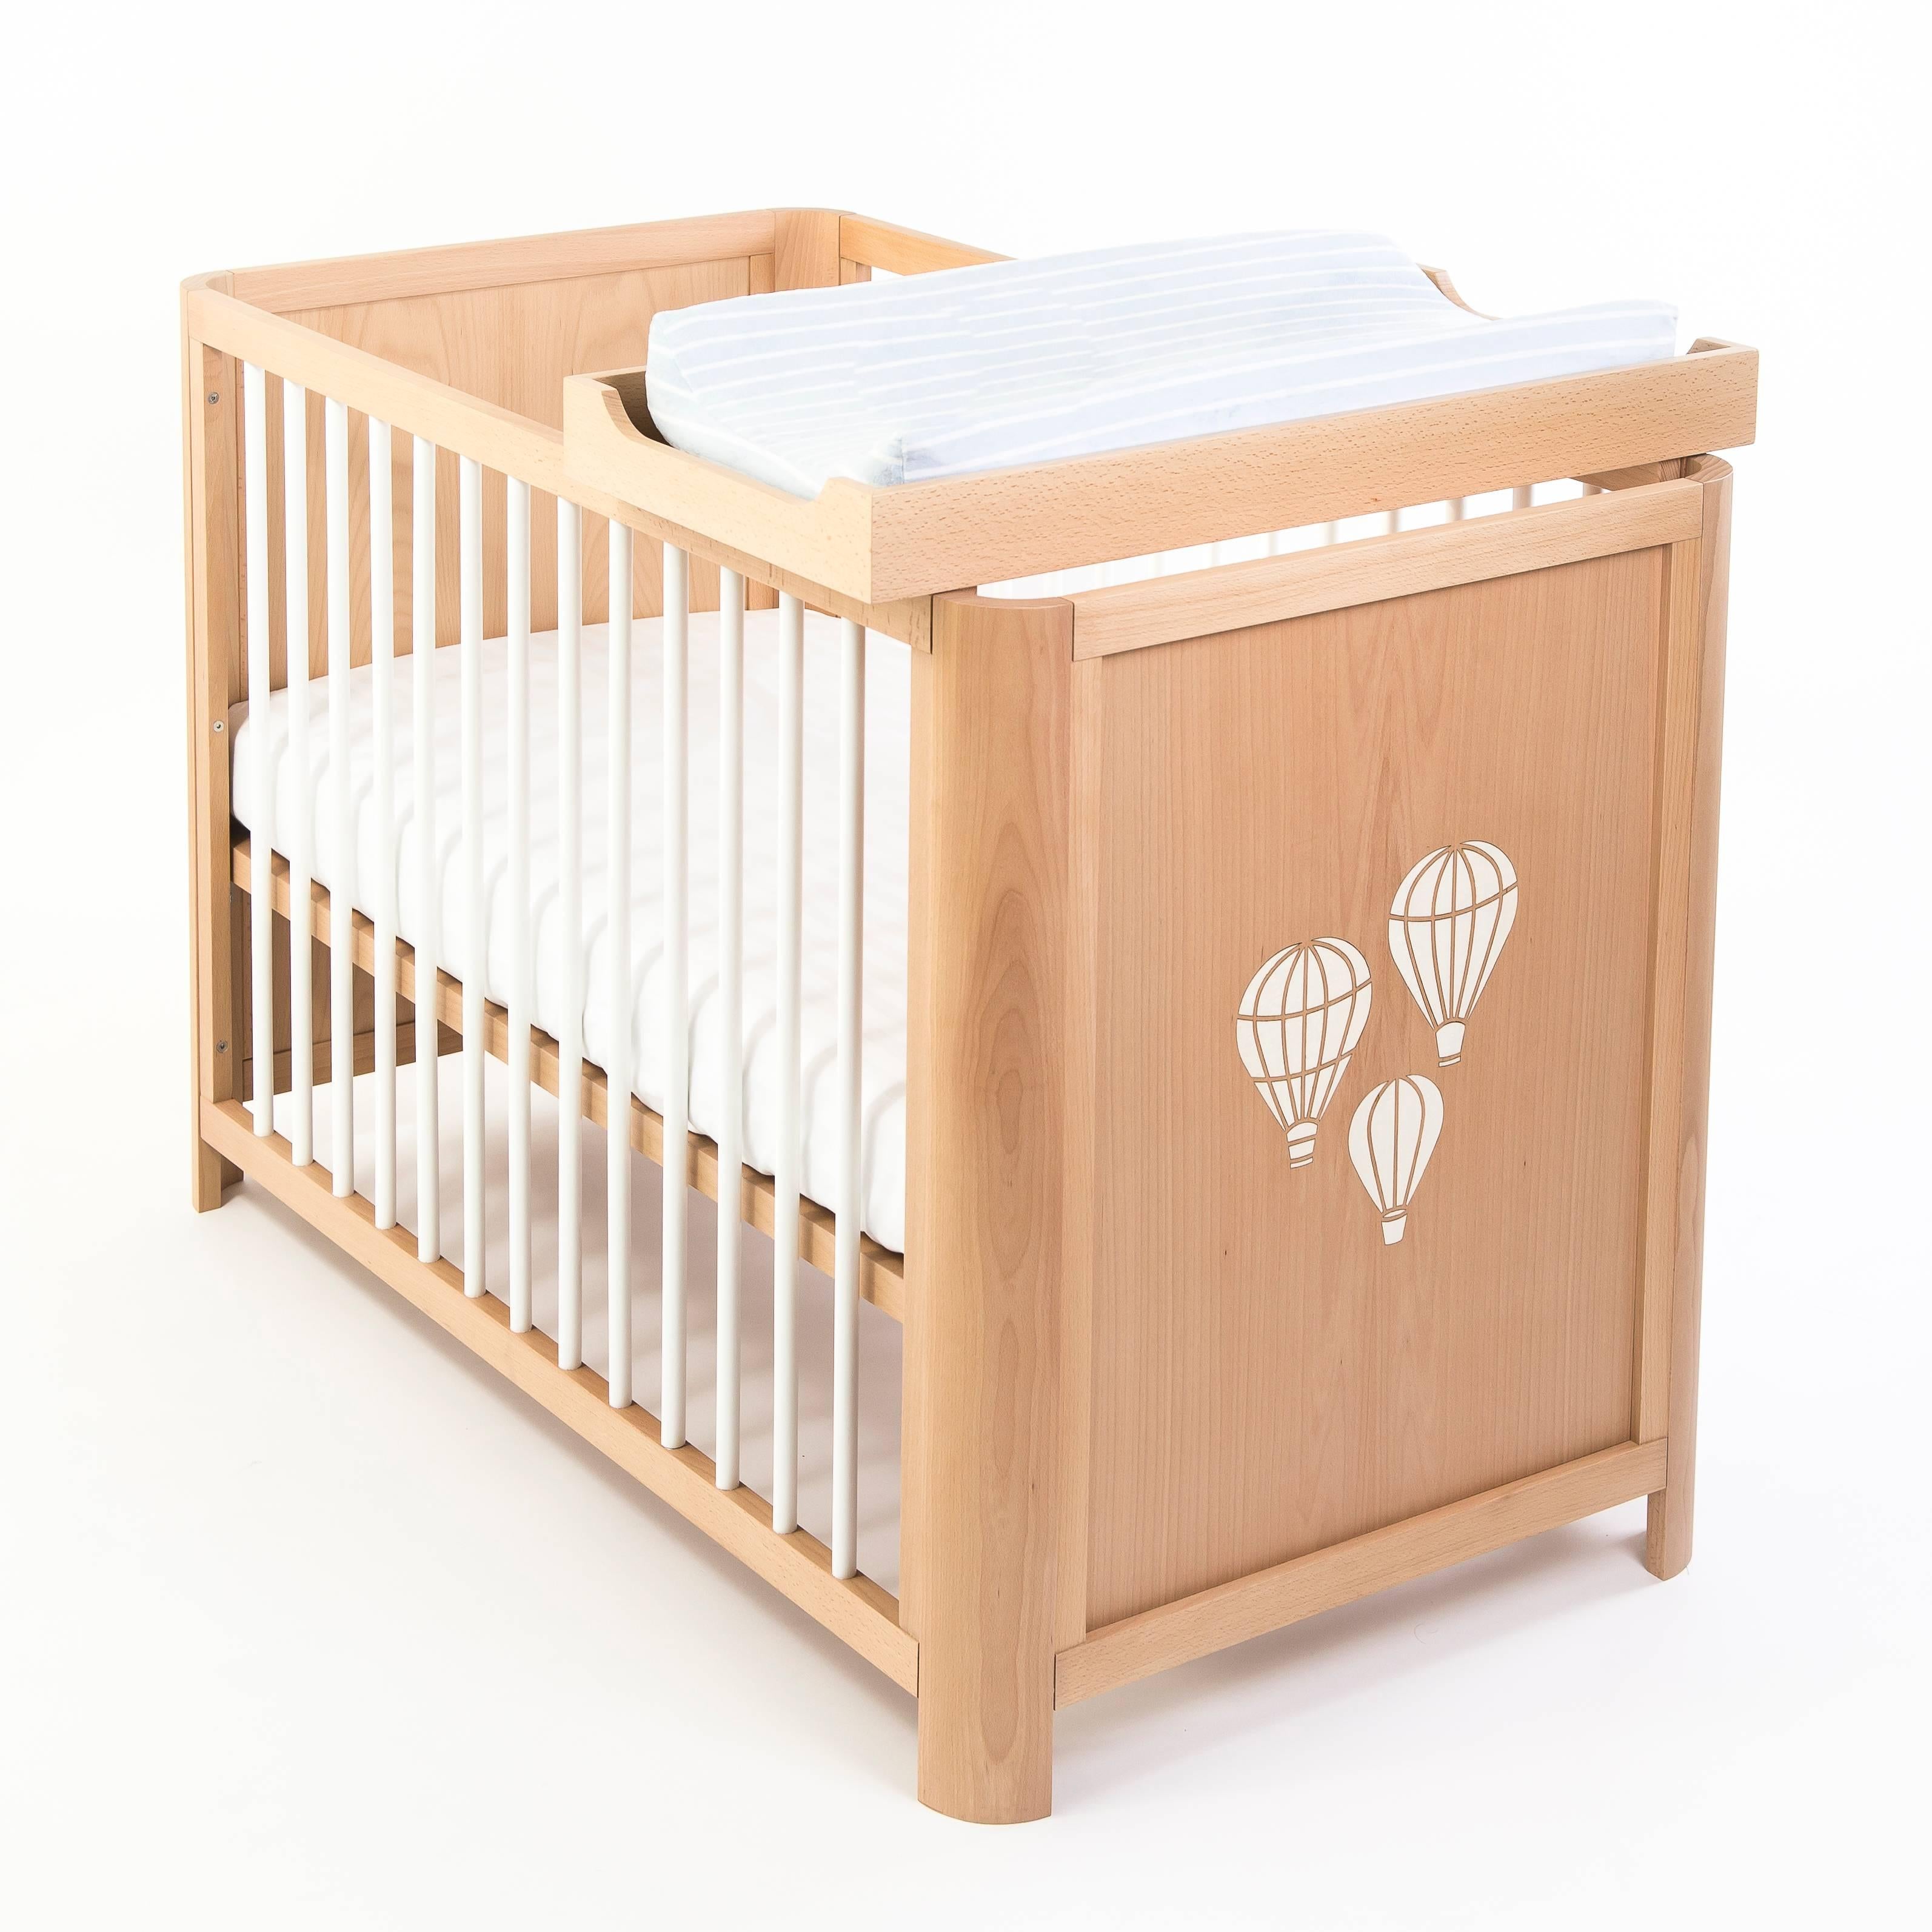 The Oasis changer offers a space-saving solution to changing baby safely and securely, using your MISK nursery crib as its platform. A smooth natural wood finish offers boundless options to mix and match with any nursery. Handmade with care.